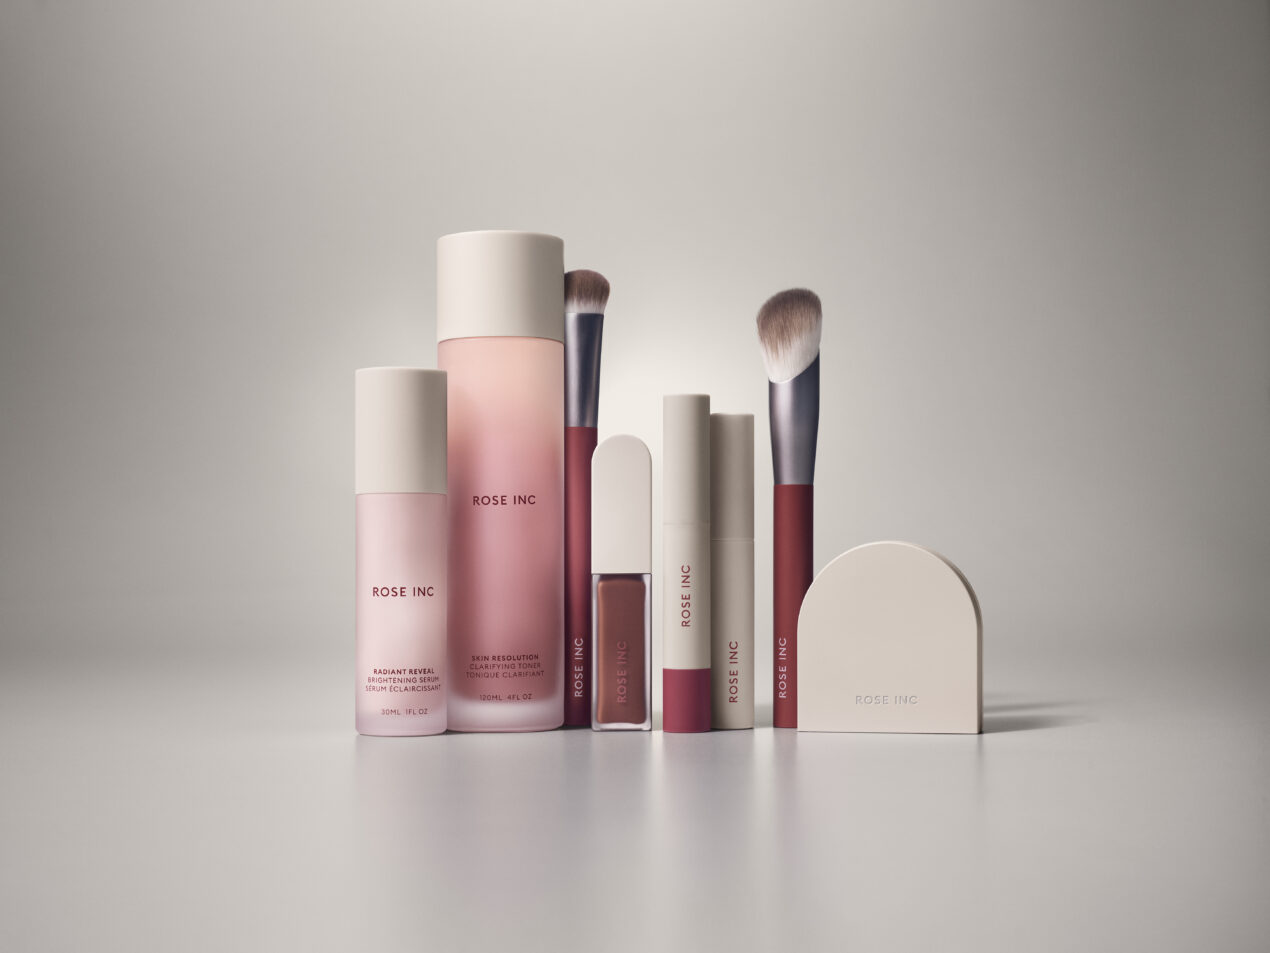 Rosie Huntington-Whiteley Launches Clean Beauty Brand Rose Inc With A Capsule Make-Up And Skincare Collection